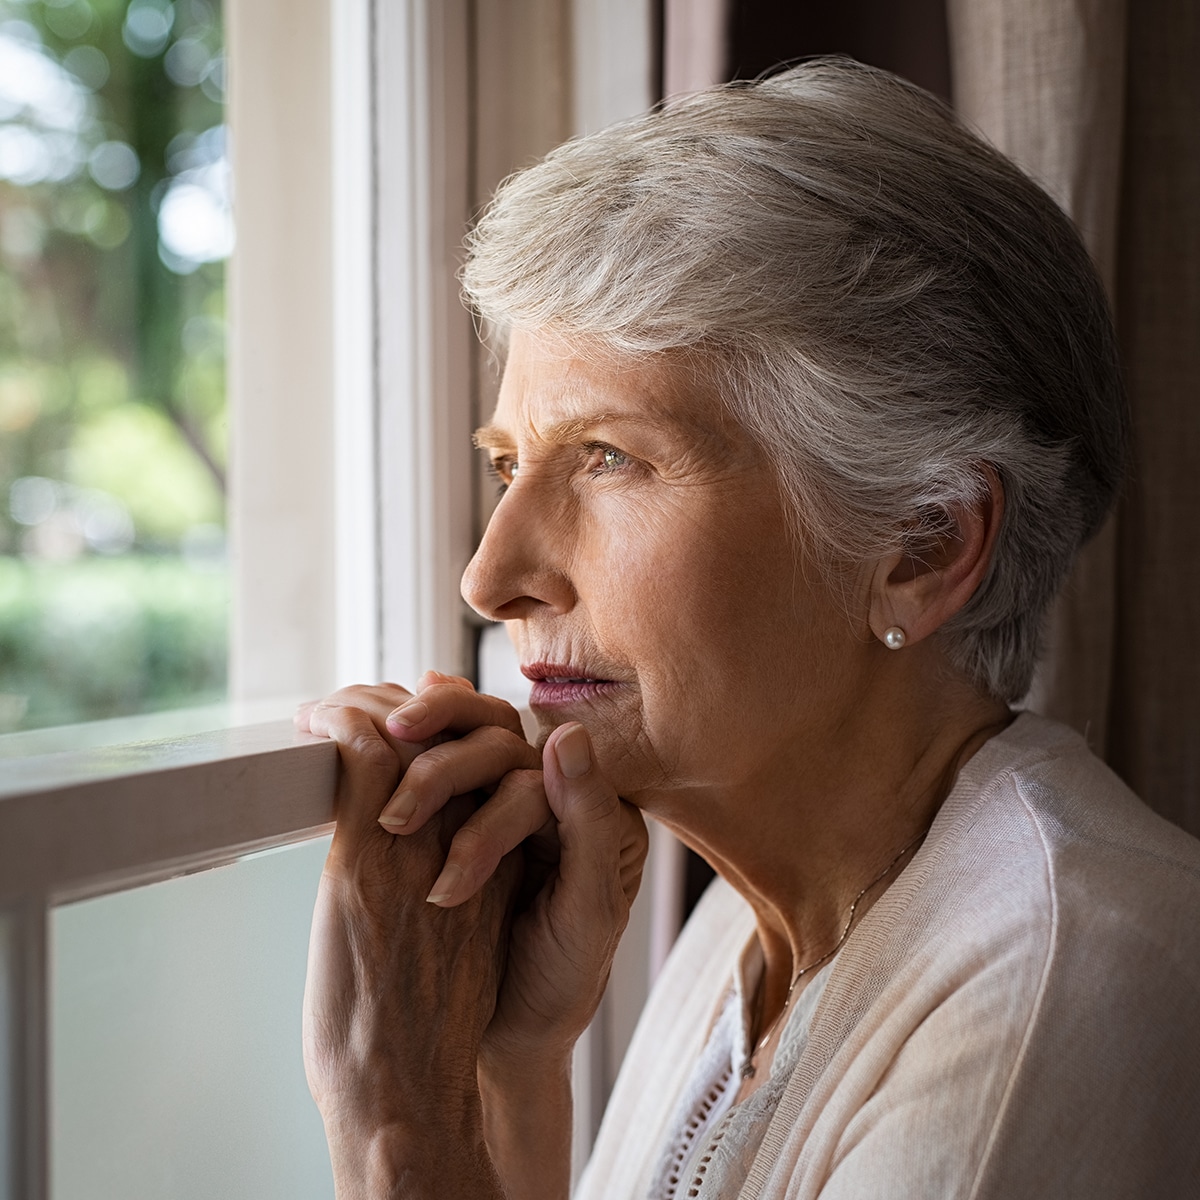 Older woman gazing out a window